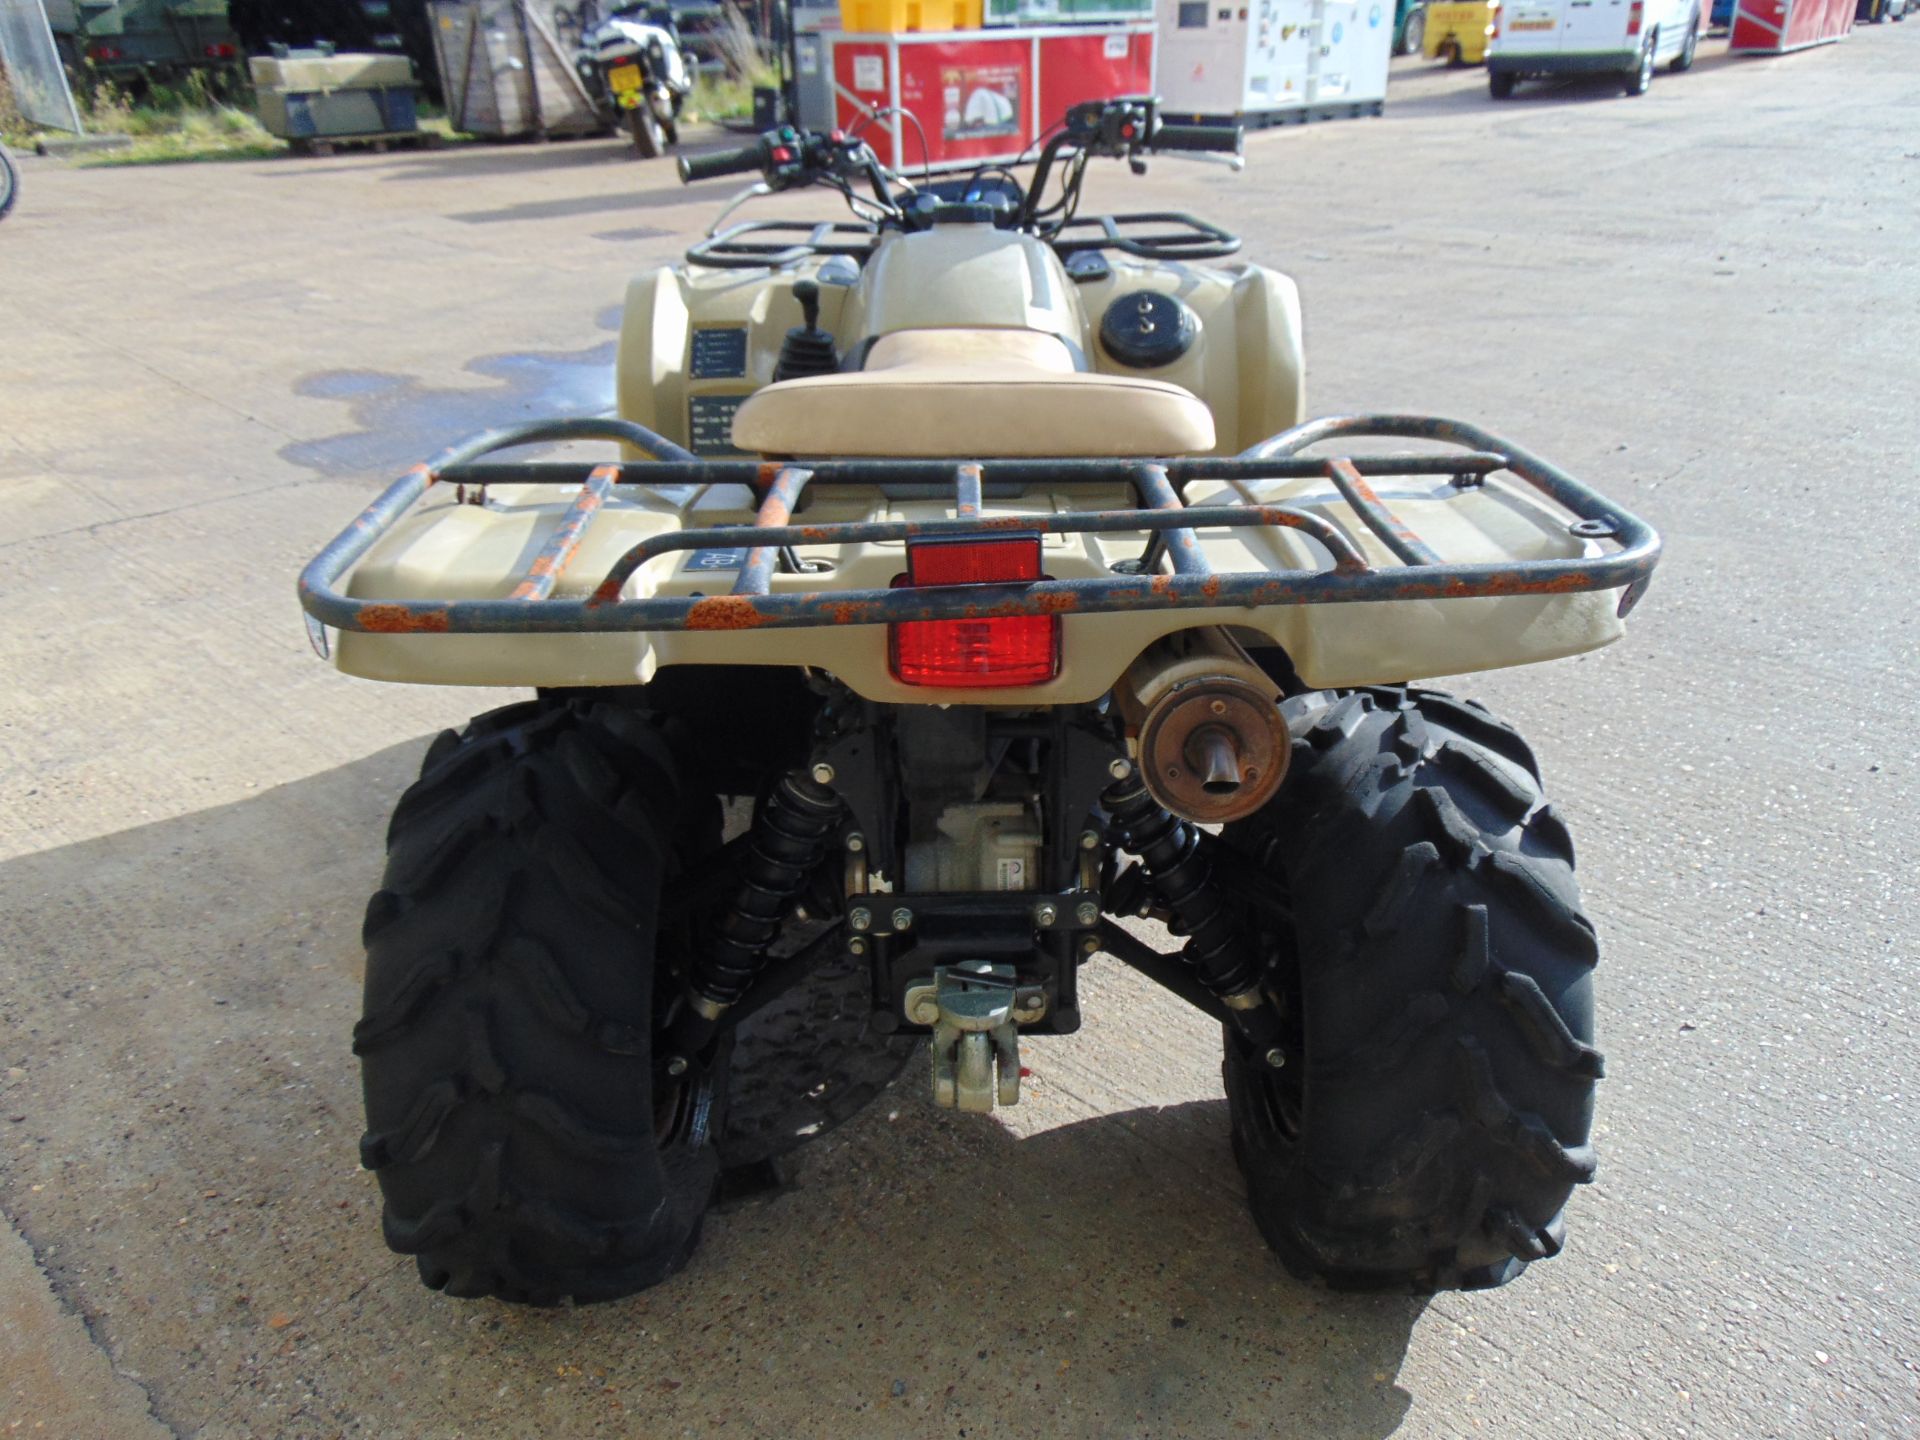 Military Specification Yamaha Grizzly 450 4 x 4 ATV Quad Bike - Image 7 of 14